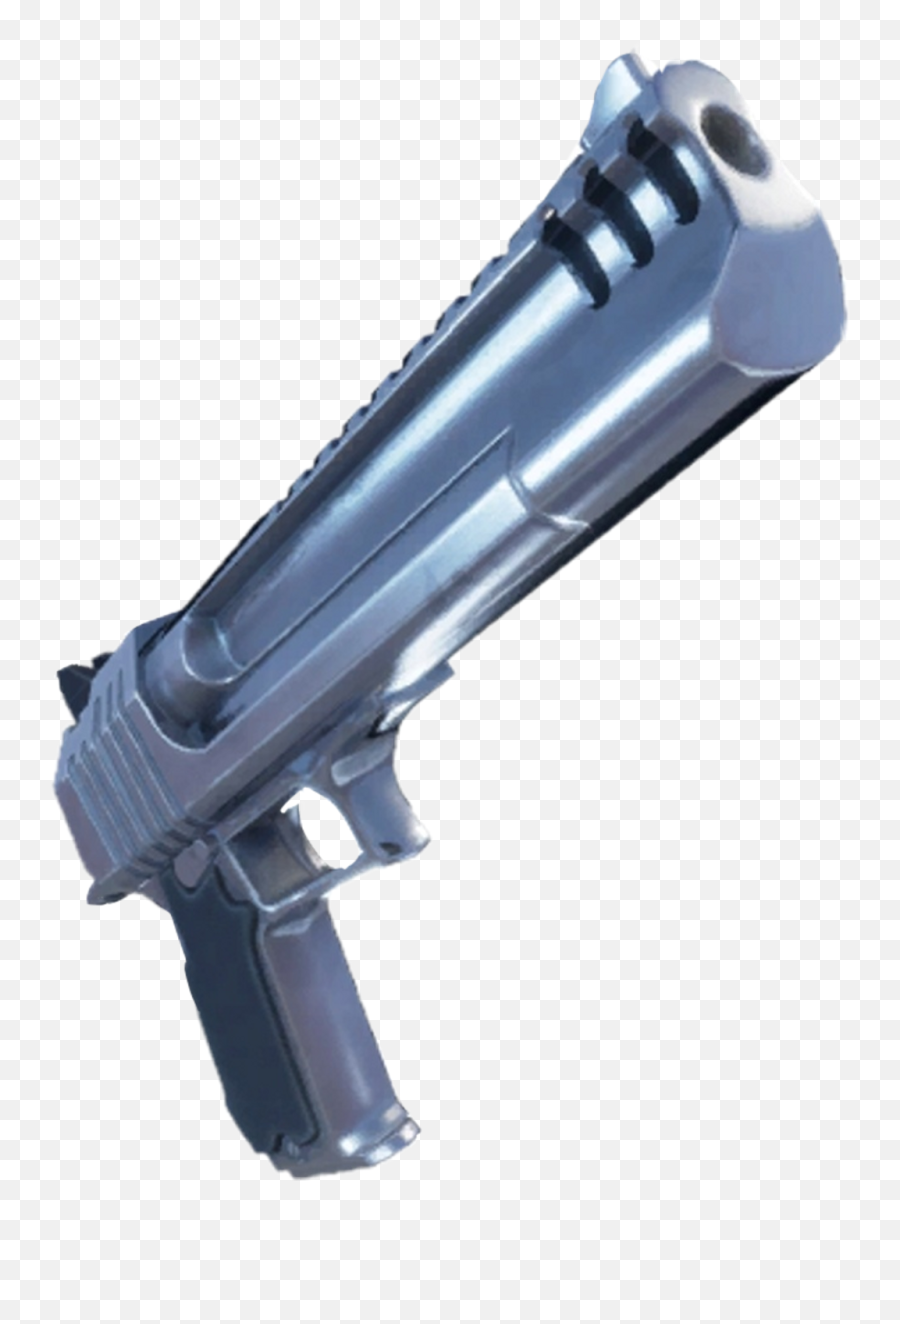 Download - Fortnite Pistol Png,Weapons Png